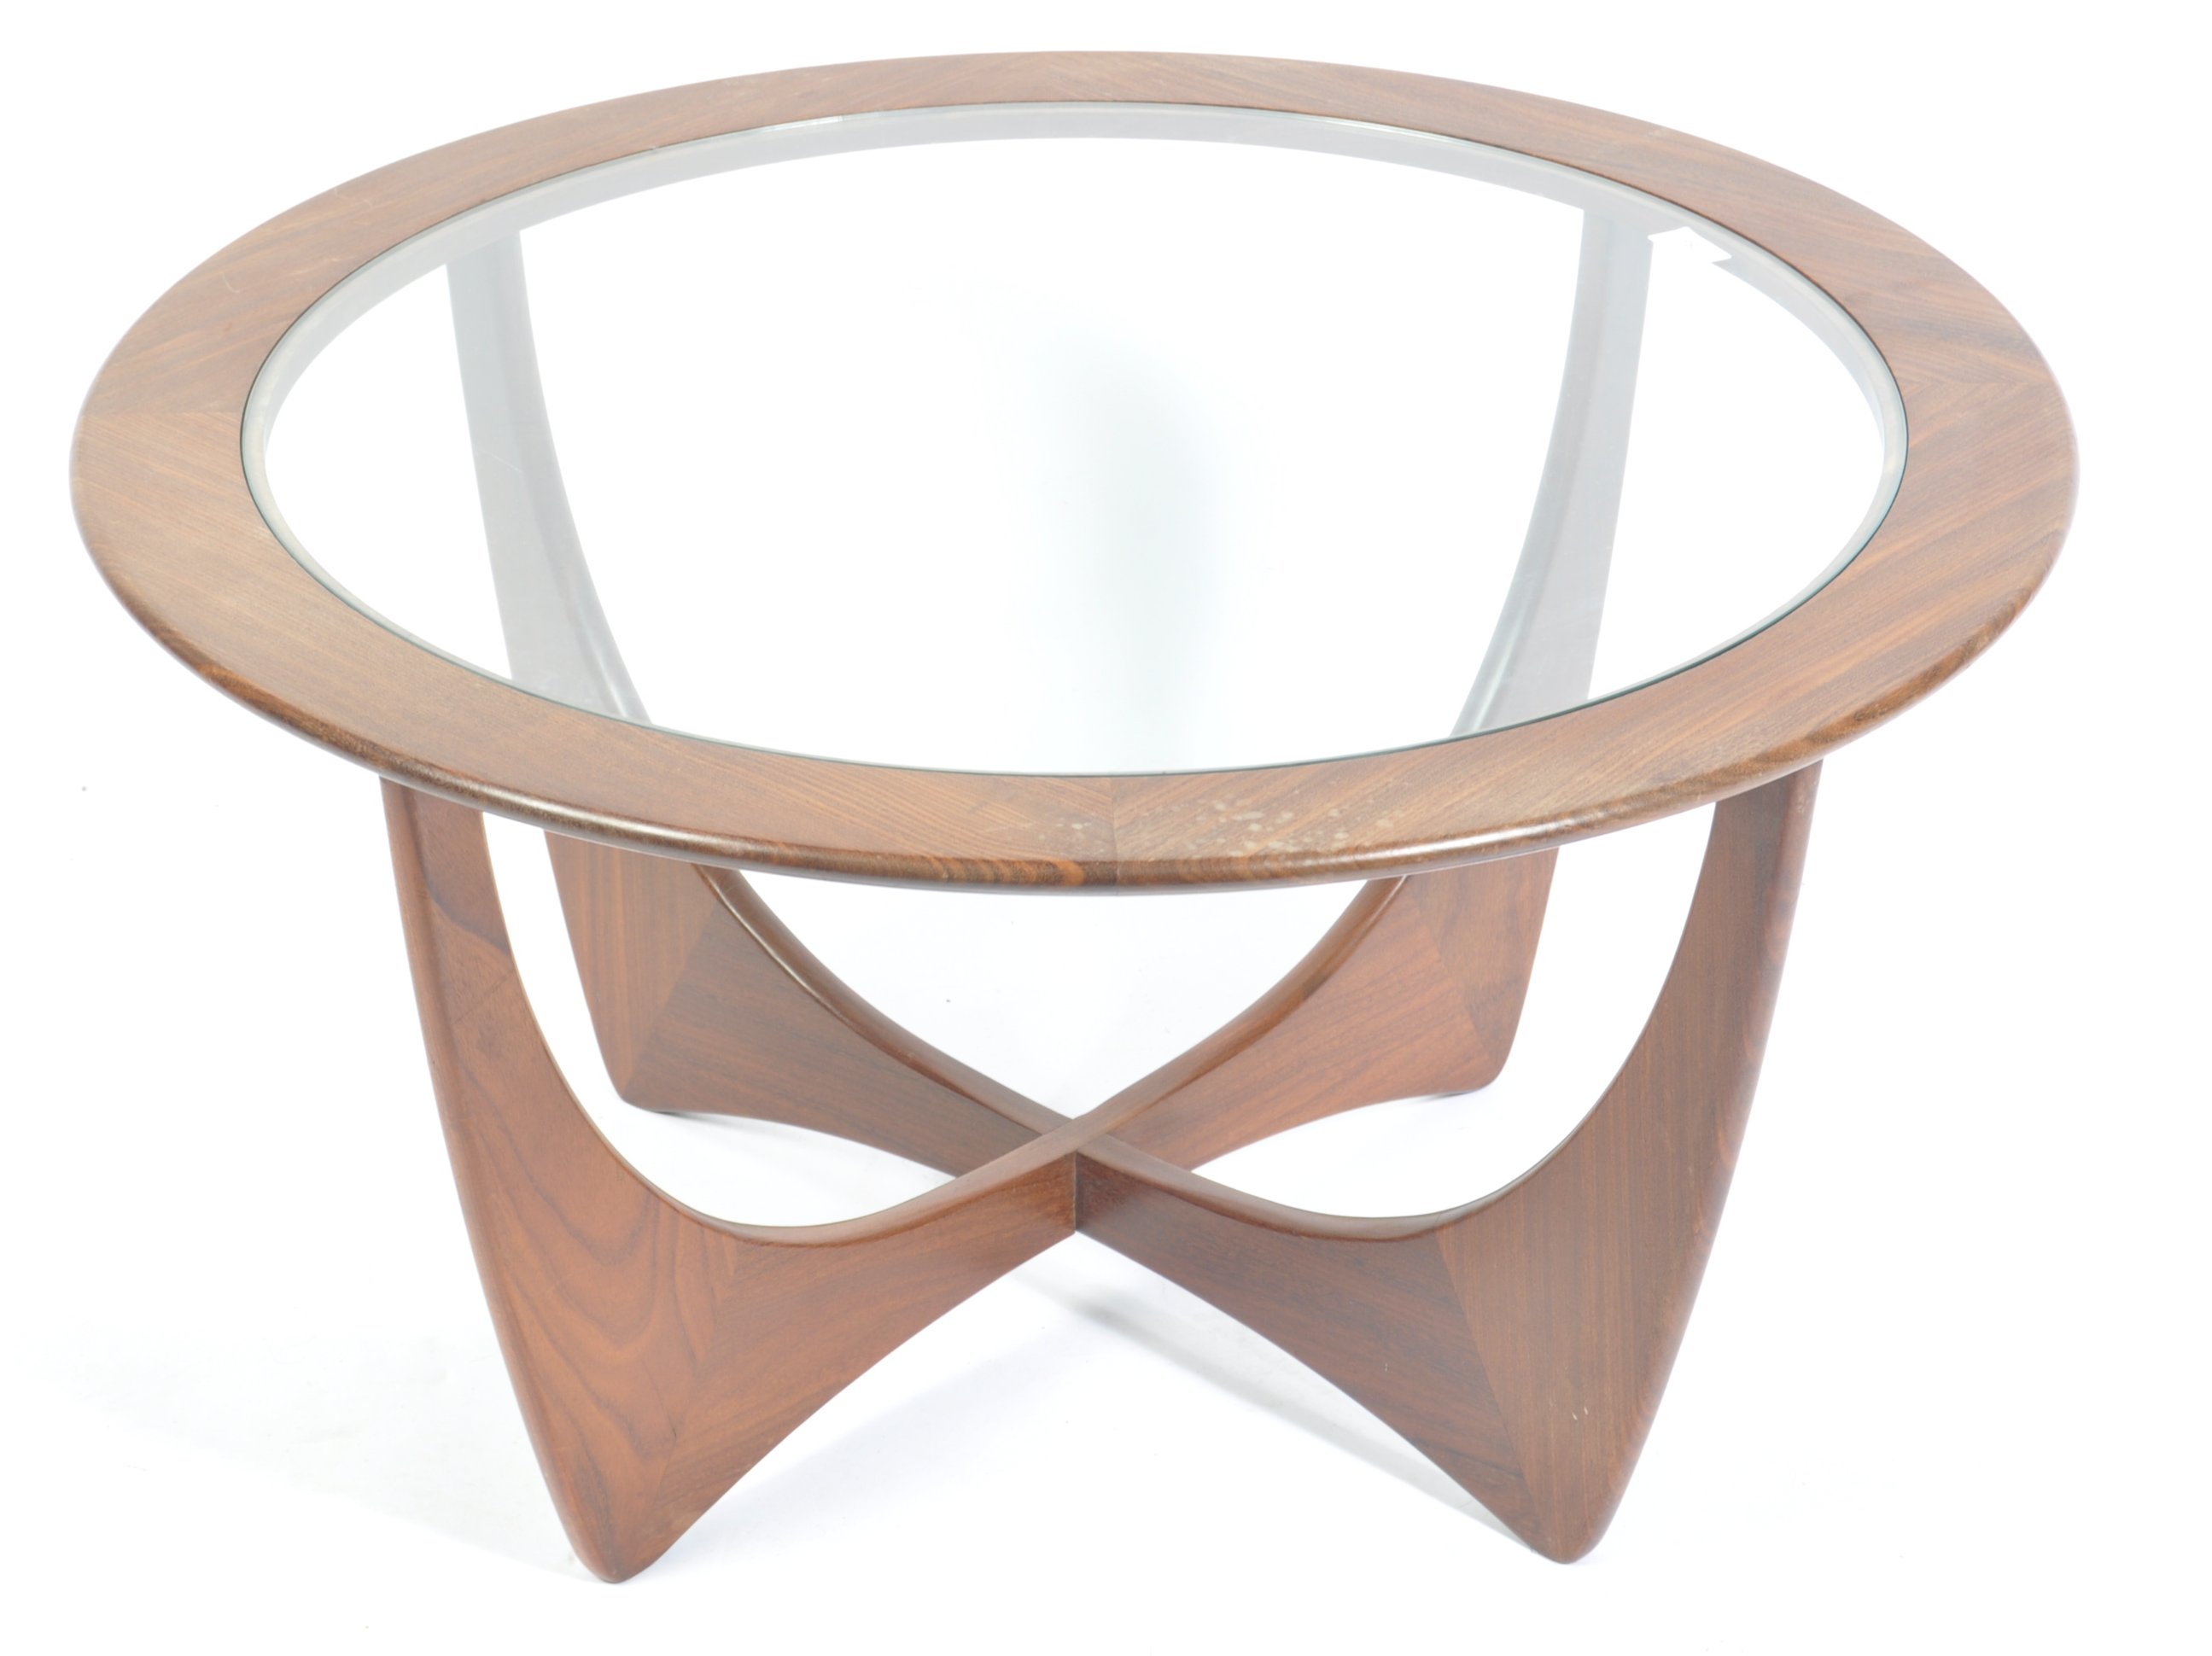 E. GOMME / G PLAN ASTRO TEAK WOOD COFFEE TABLE BY VB. WILKINS - Image 2 of 5